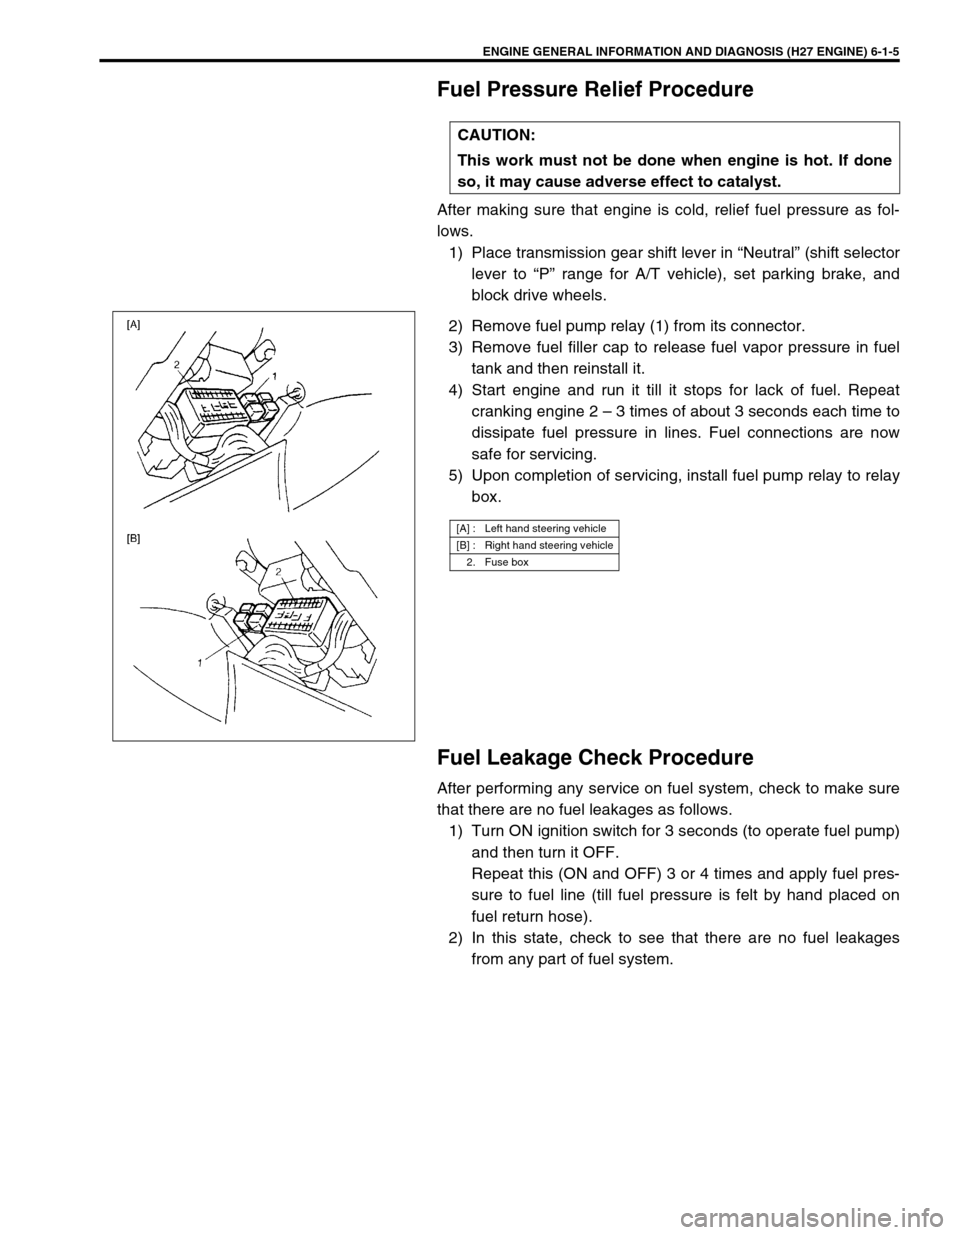 SUZUKI GRAND VITARA 1999 2.G Owners Manual ENGINE GENERAL INFORMATION AND DIAGNOSIS (H27 ENGINE) 6-1-5
Fuel Pressure Relief Procedure
After making sure that engine is cold, relief fuel pressure as fol-
lows.
1) Place transmission gear shift le